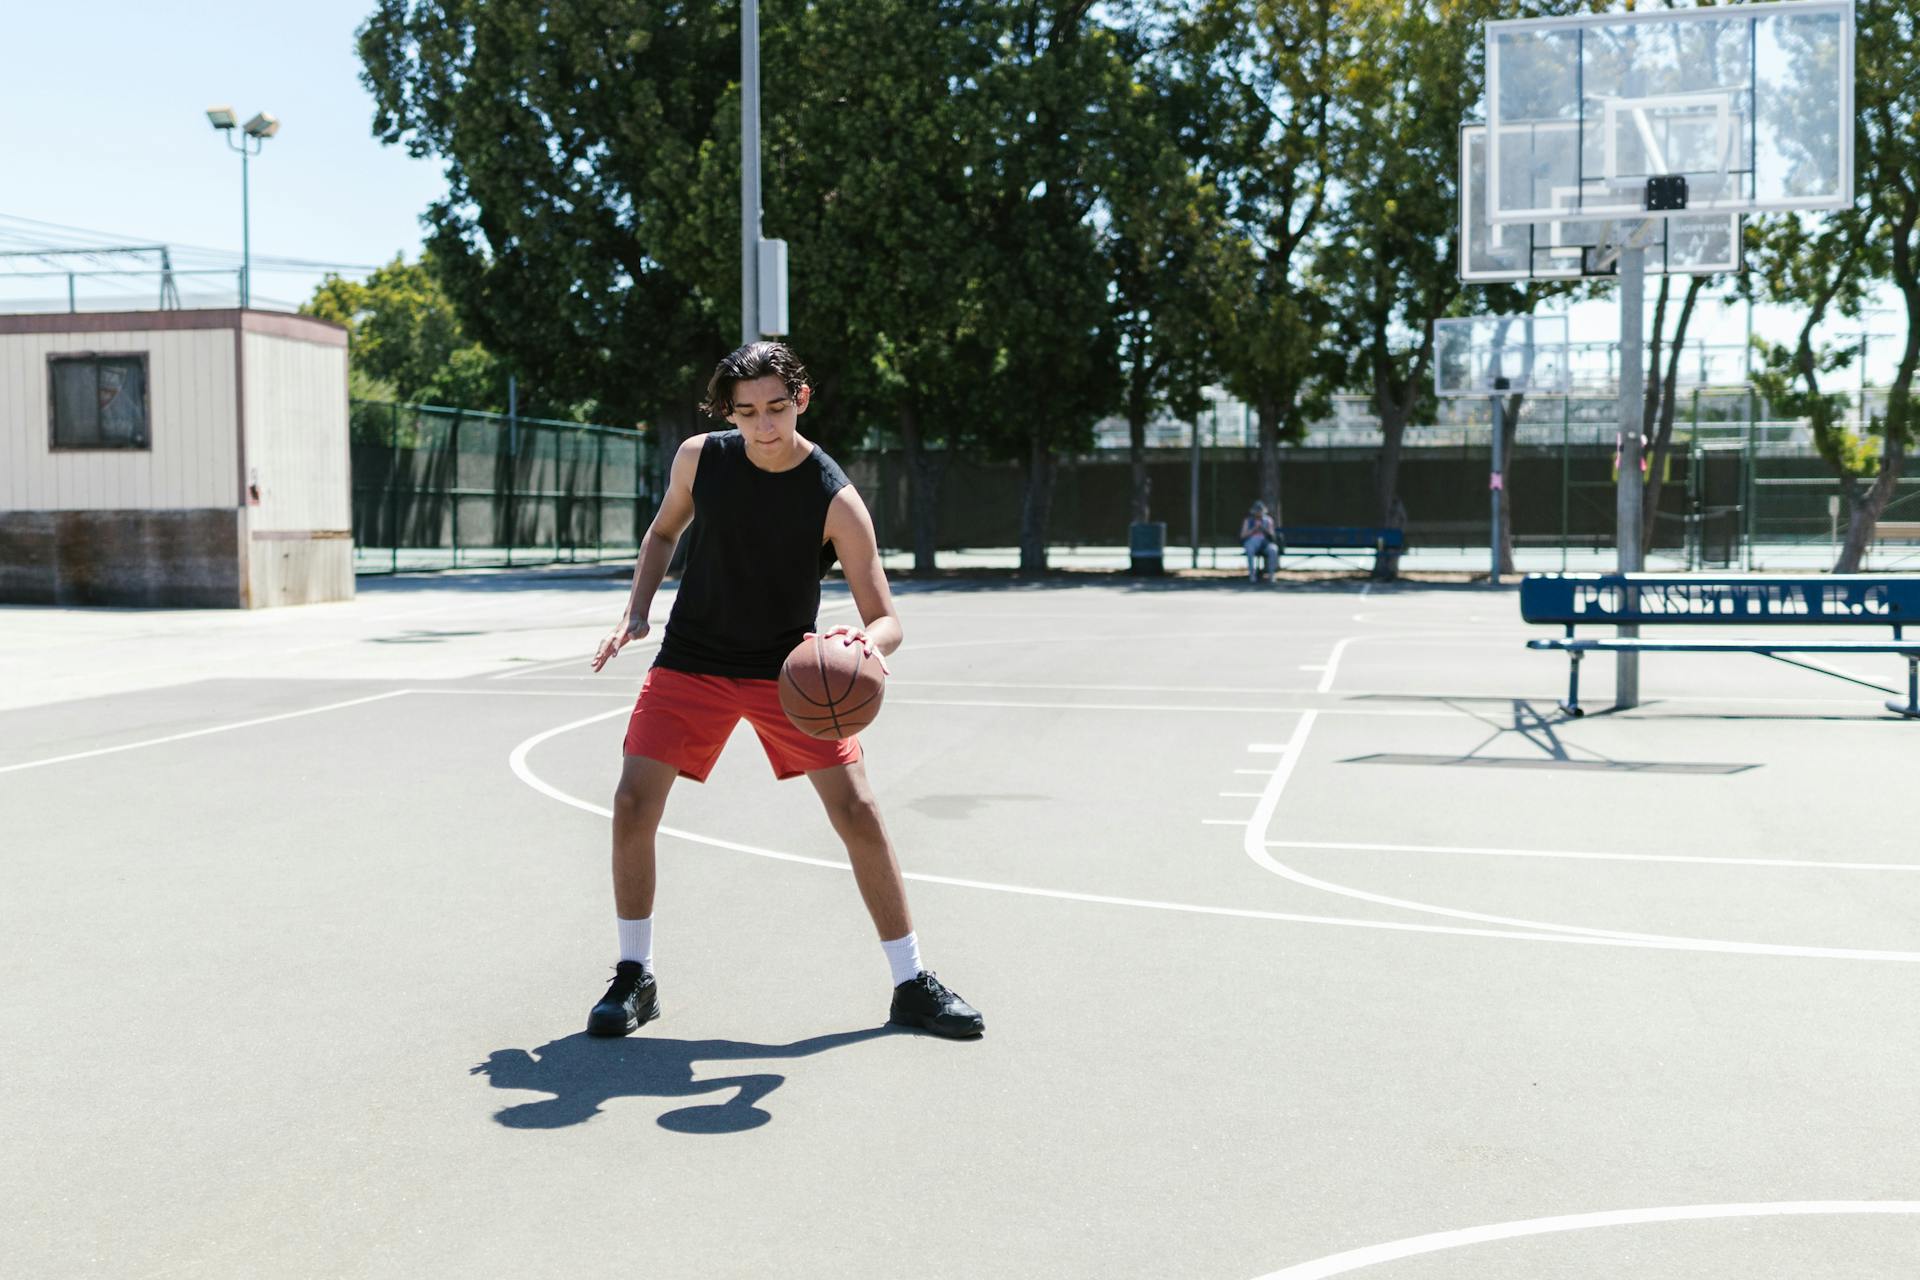 A boy playing basketball | Source: Pexels